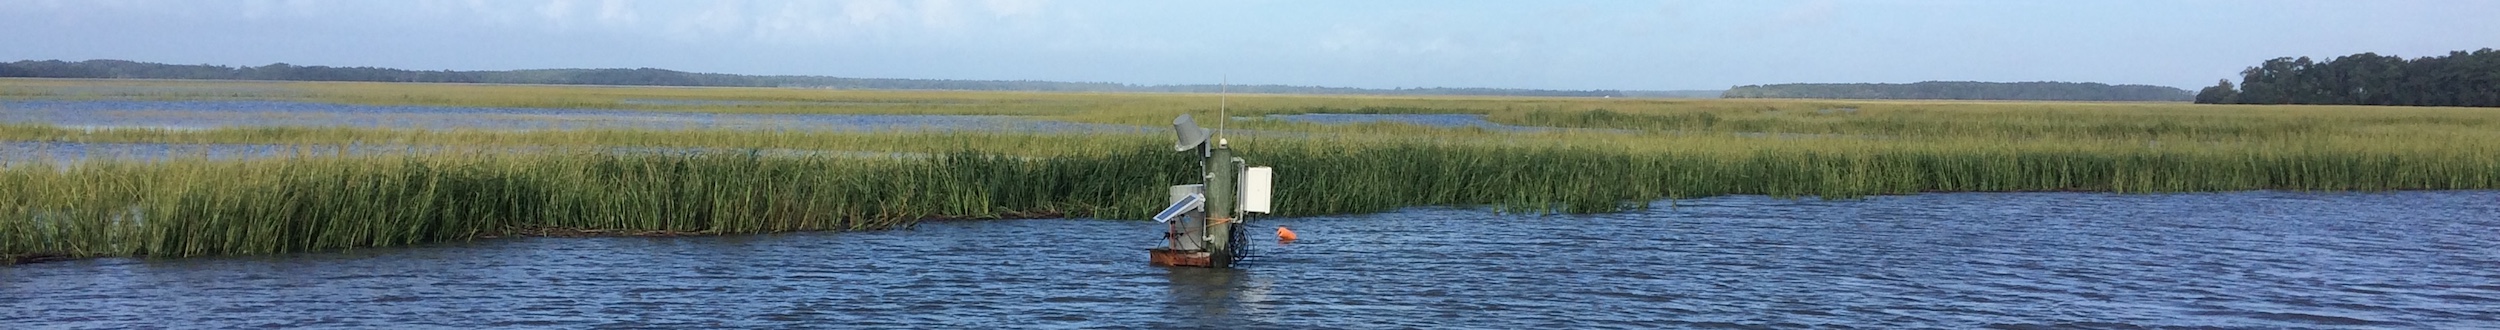 A water quality monitoring station sits just above the water